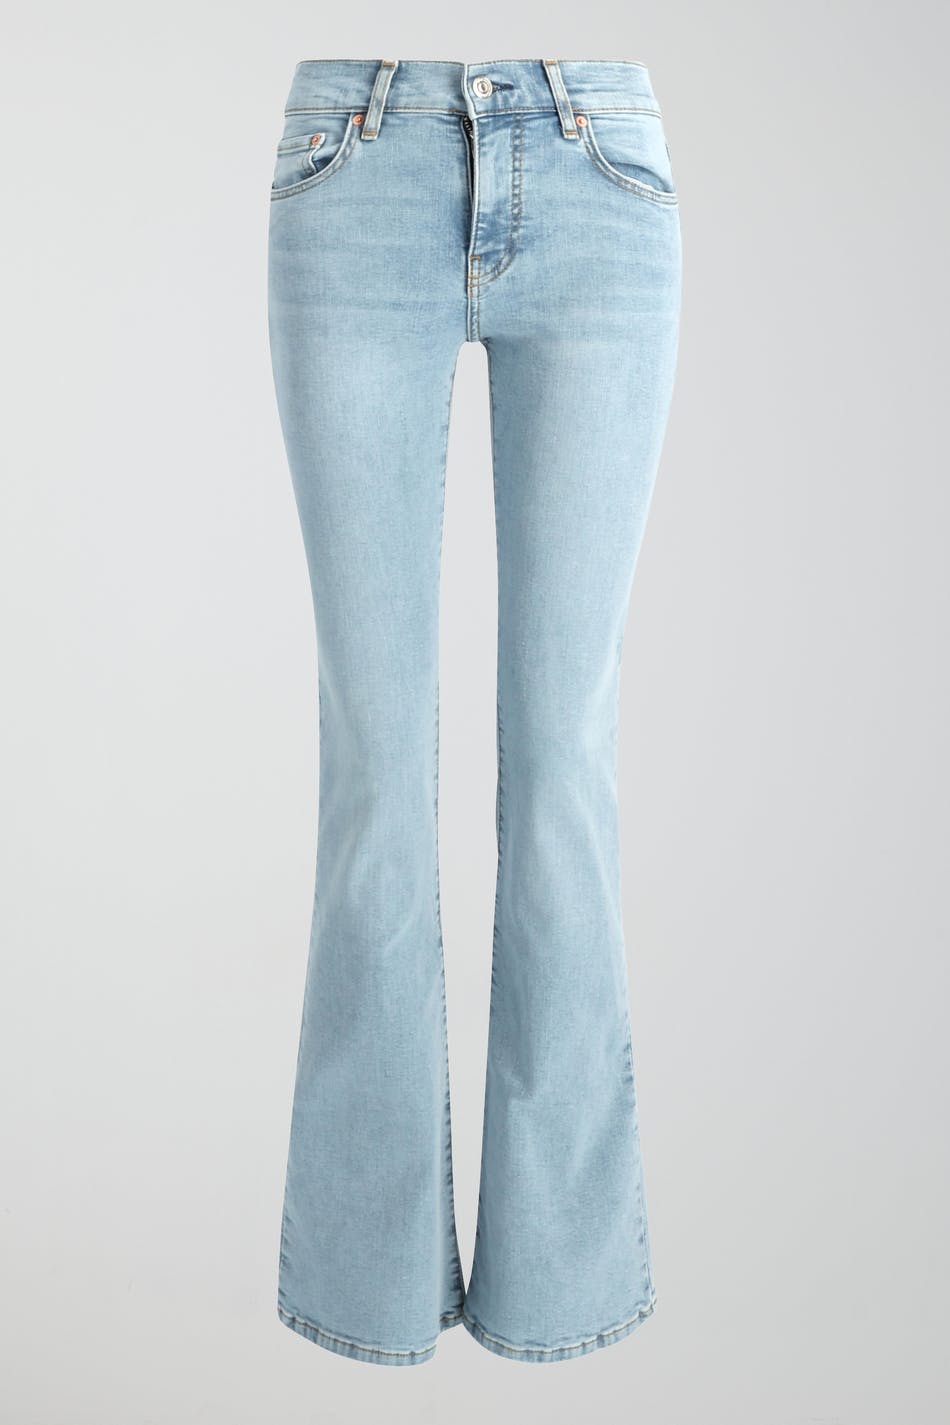 Low waist petite bootcut jeans - Gina Tricot